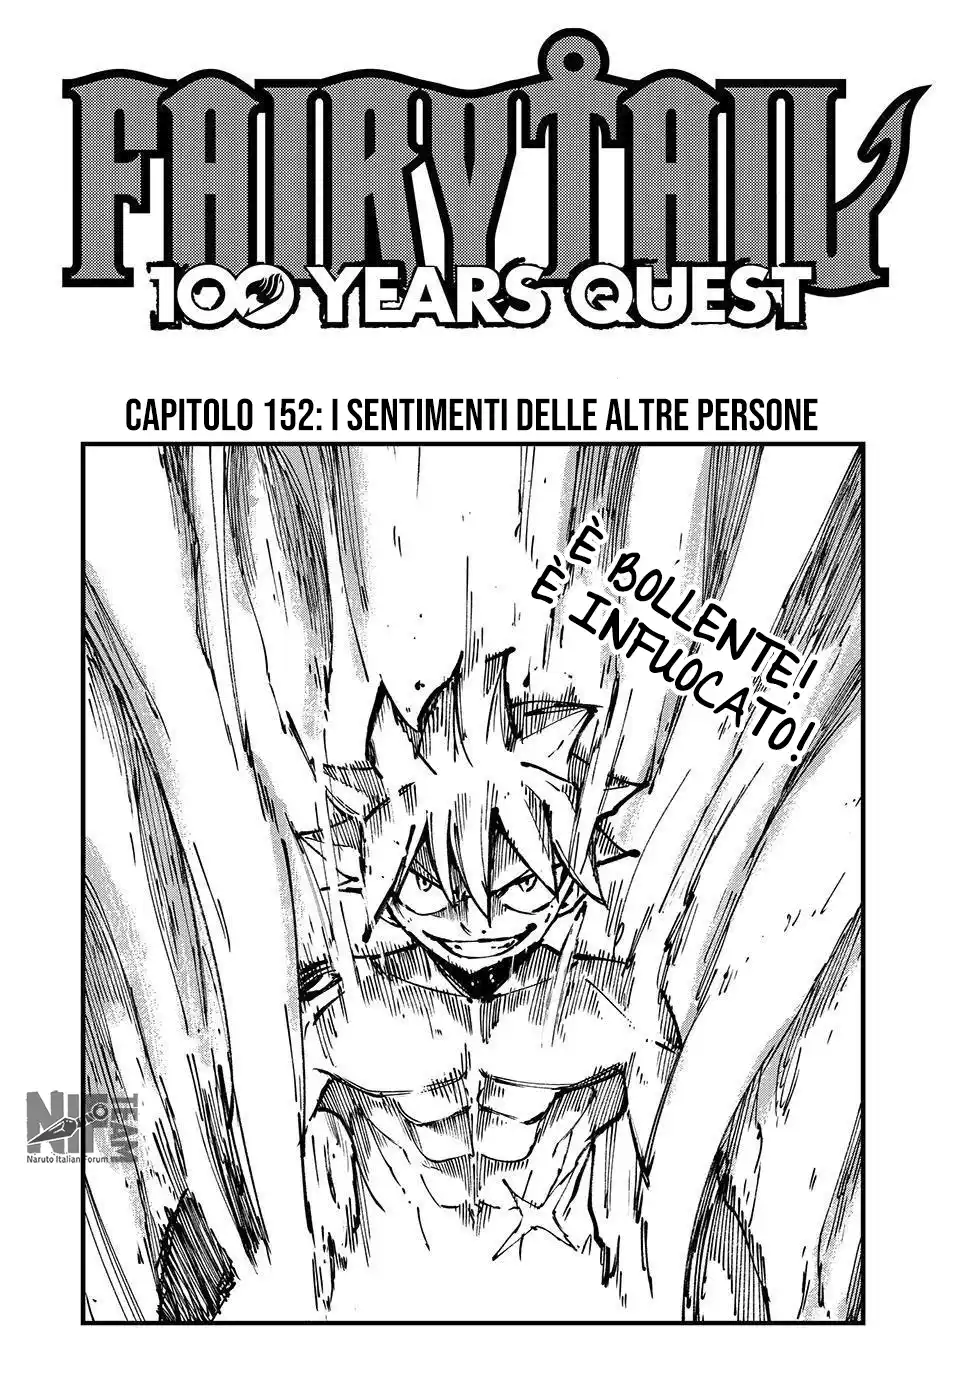 Fairy Tail: 100 Years Quest Capitolo 152 page 1